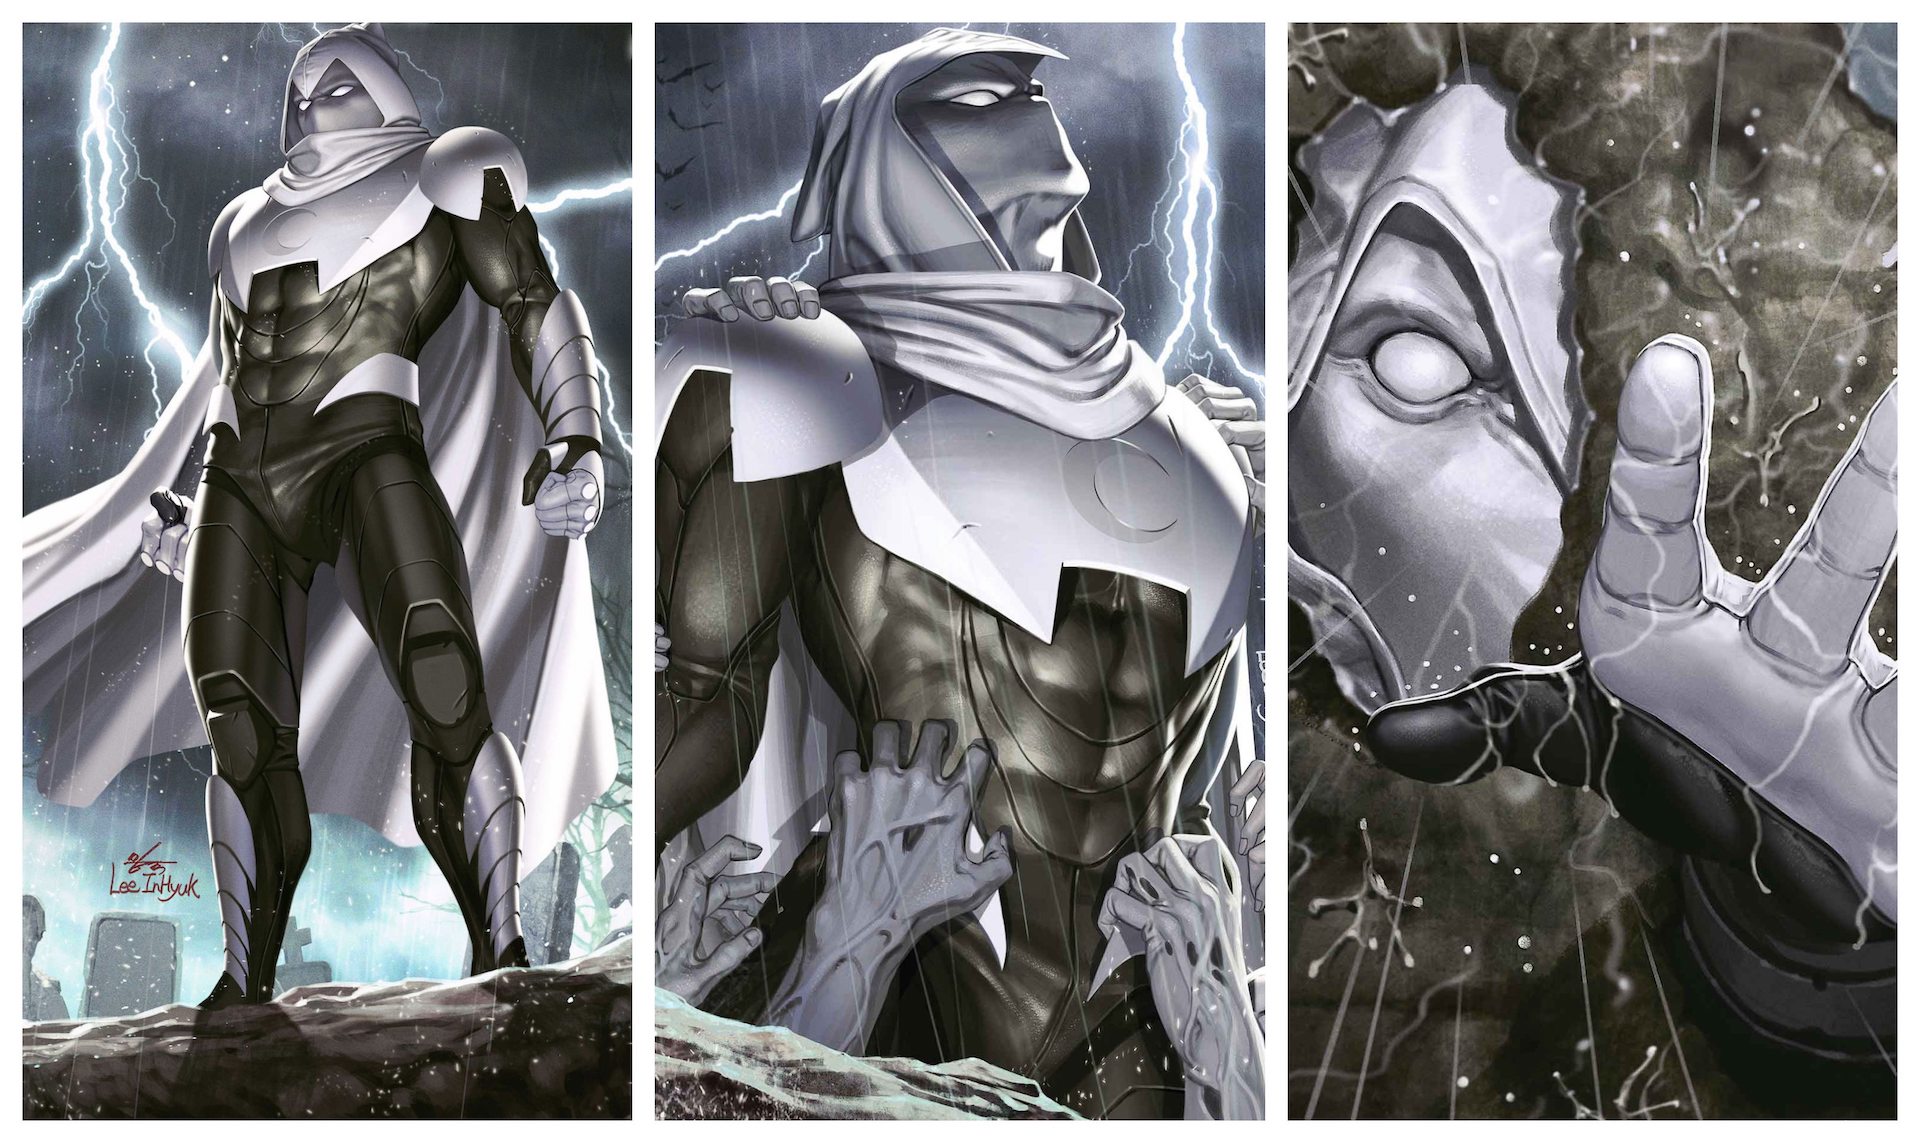 Marvel reveals three new Moon Knight covers as part of 'final days' push